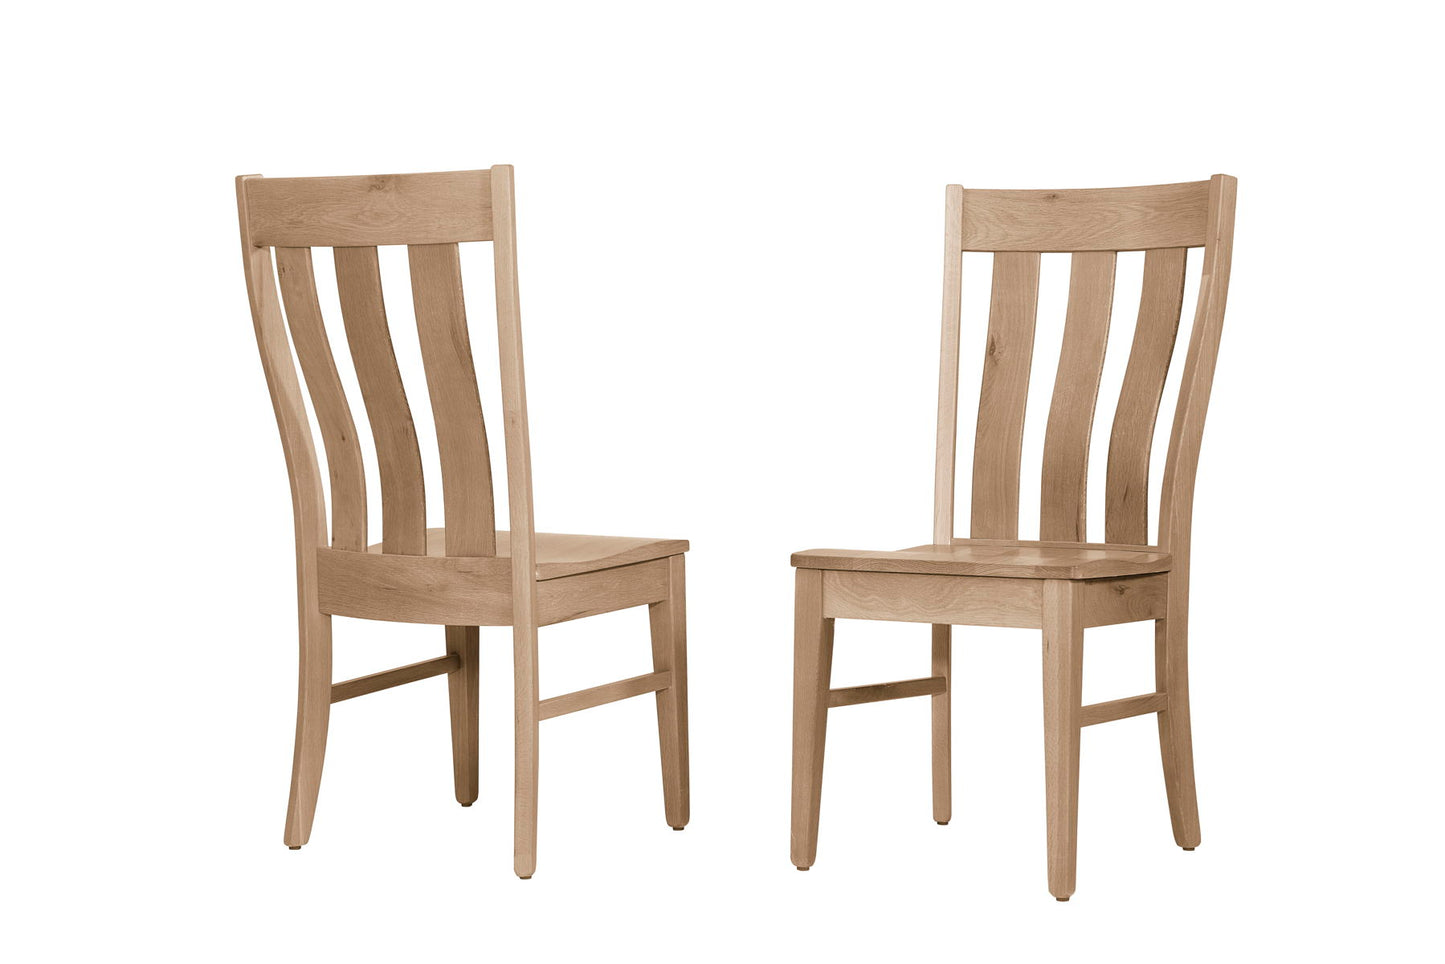 Dovetail - Vertical Slat Dining Chair